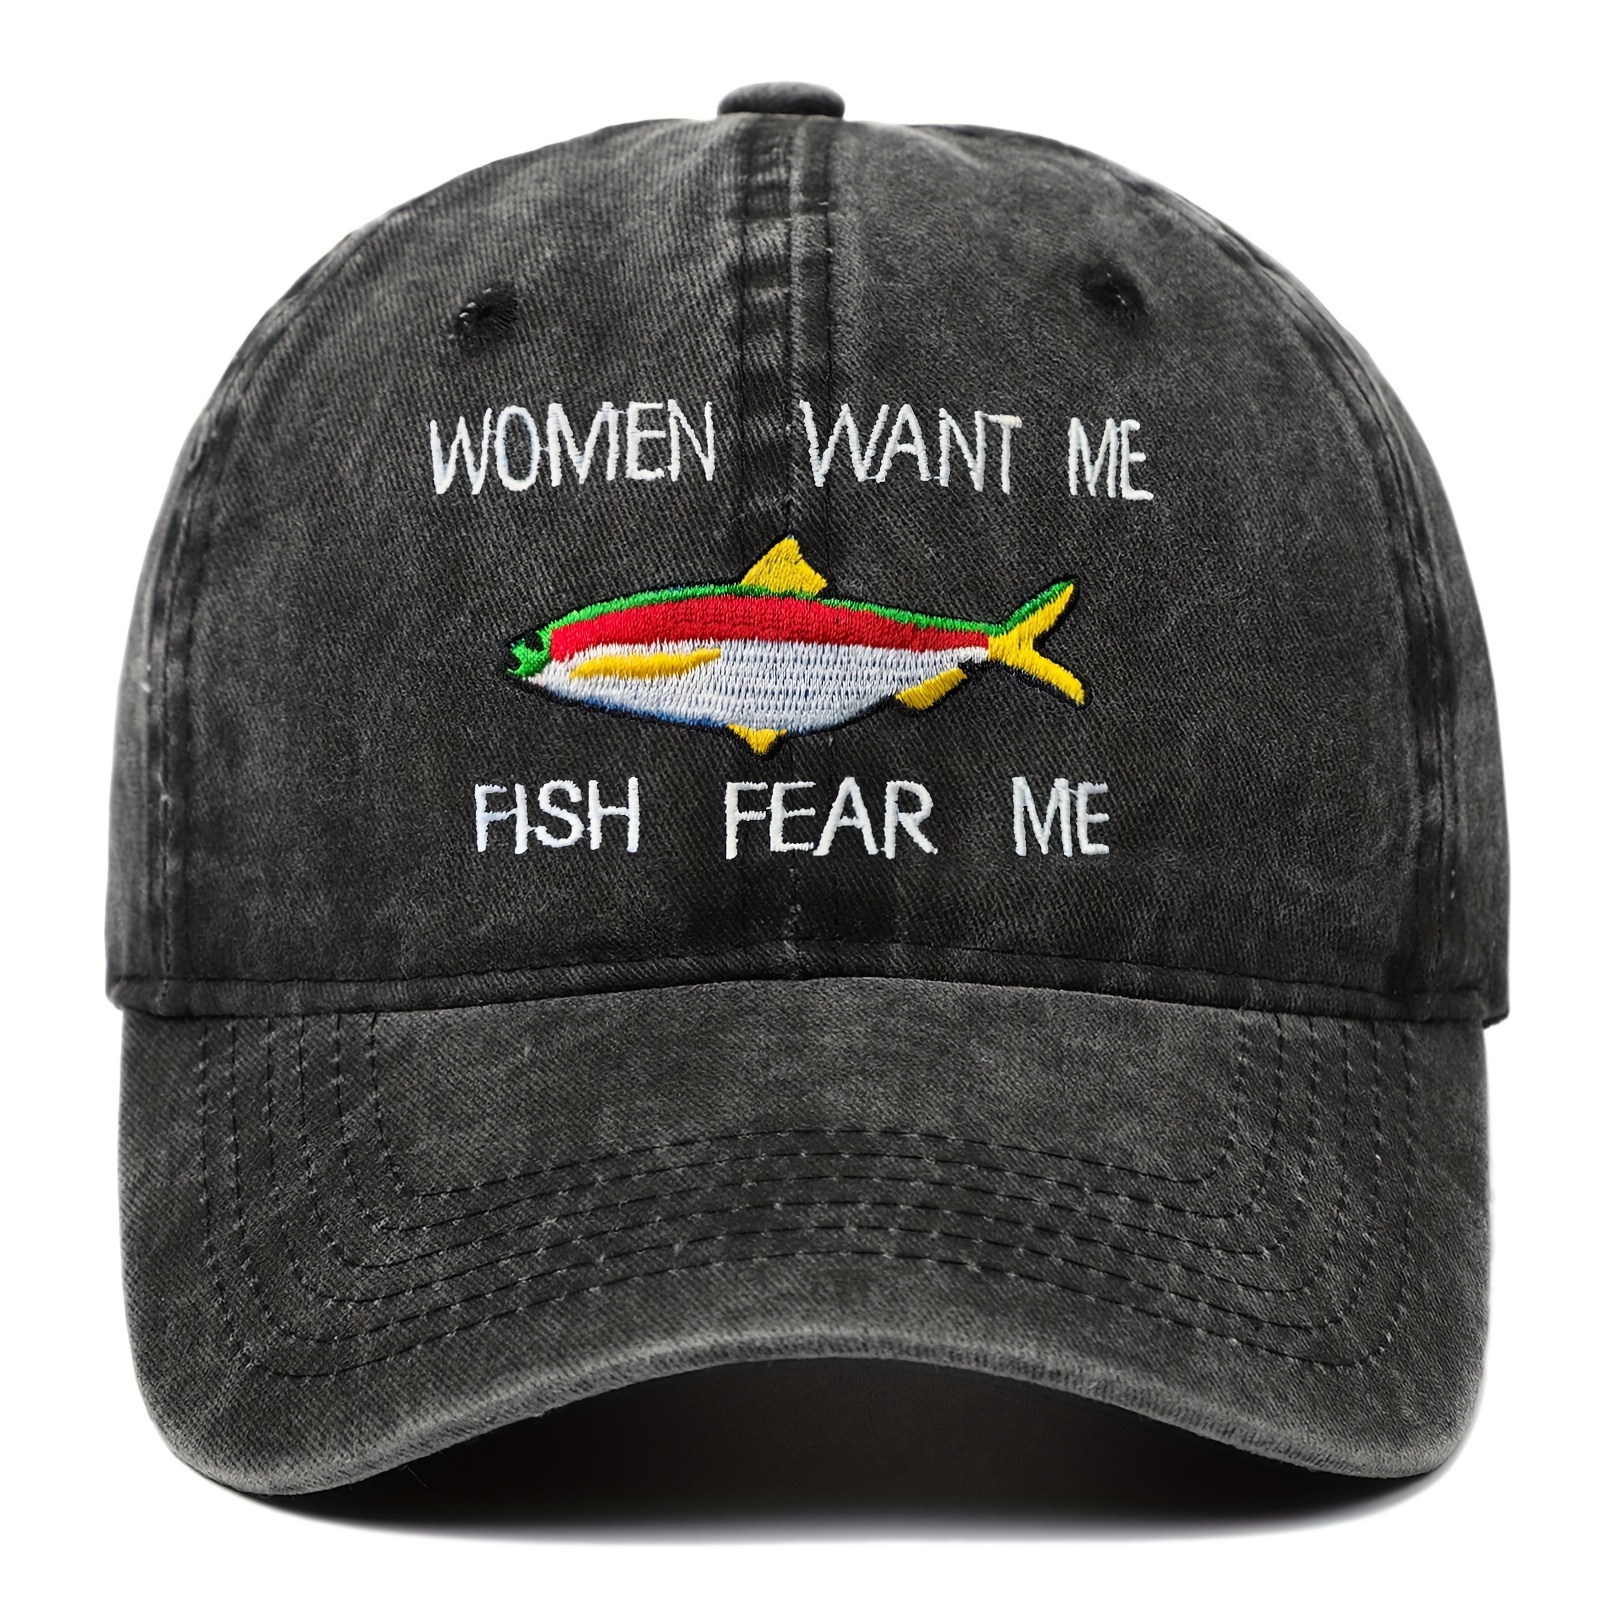 1pc Letter Just Fish It Embroidered Knitted Hat For Autumn And